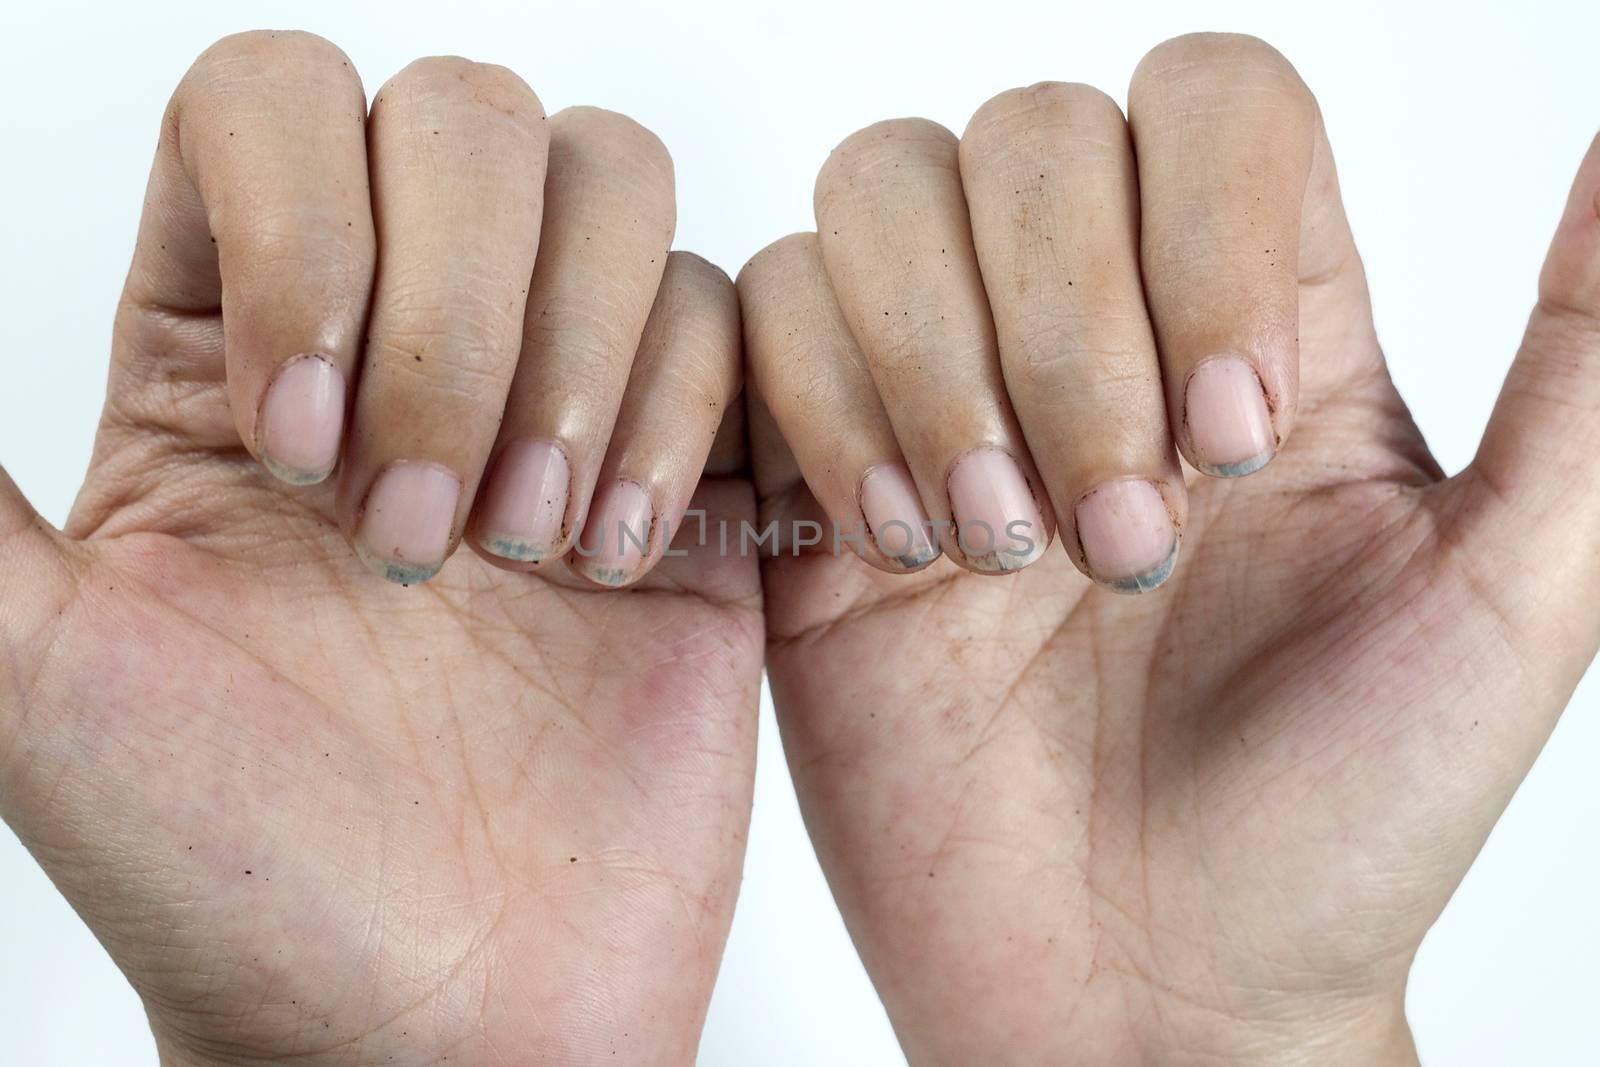 Dirty nails, dirty with dirt lodged in the nails by asiandelight